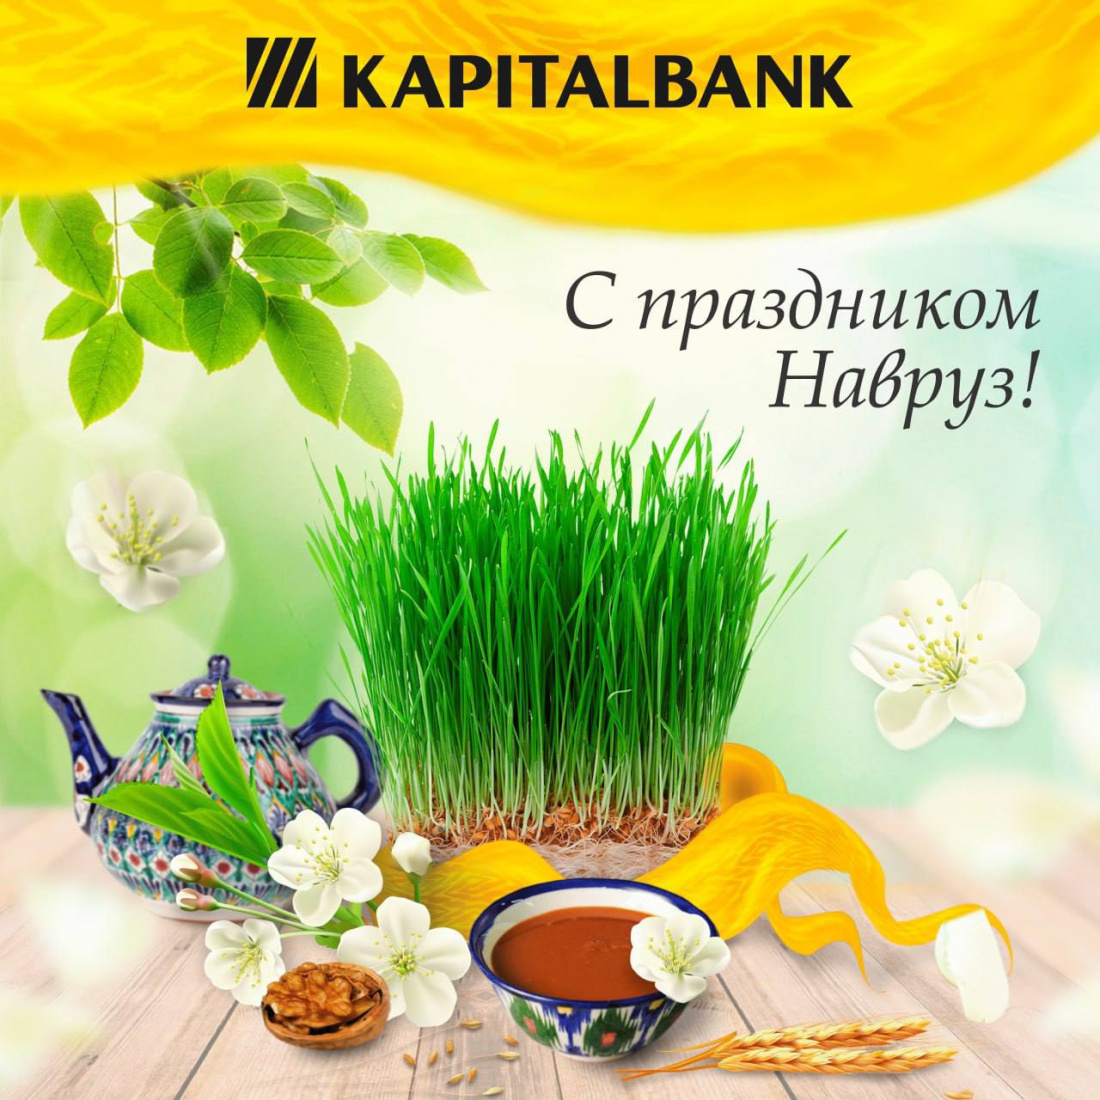 “Kapitalbank” JSCB sincerely congratulates you and yours with the spring holiday - Navruz!